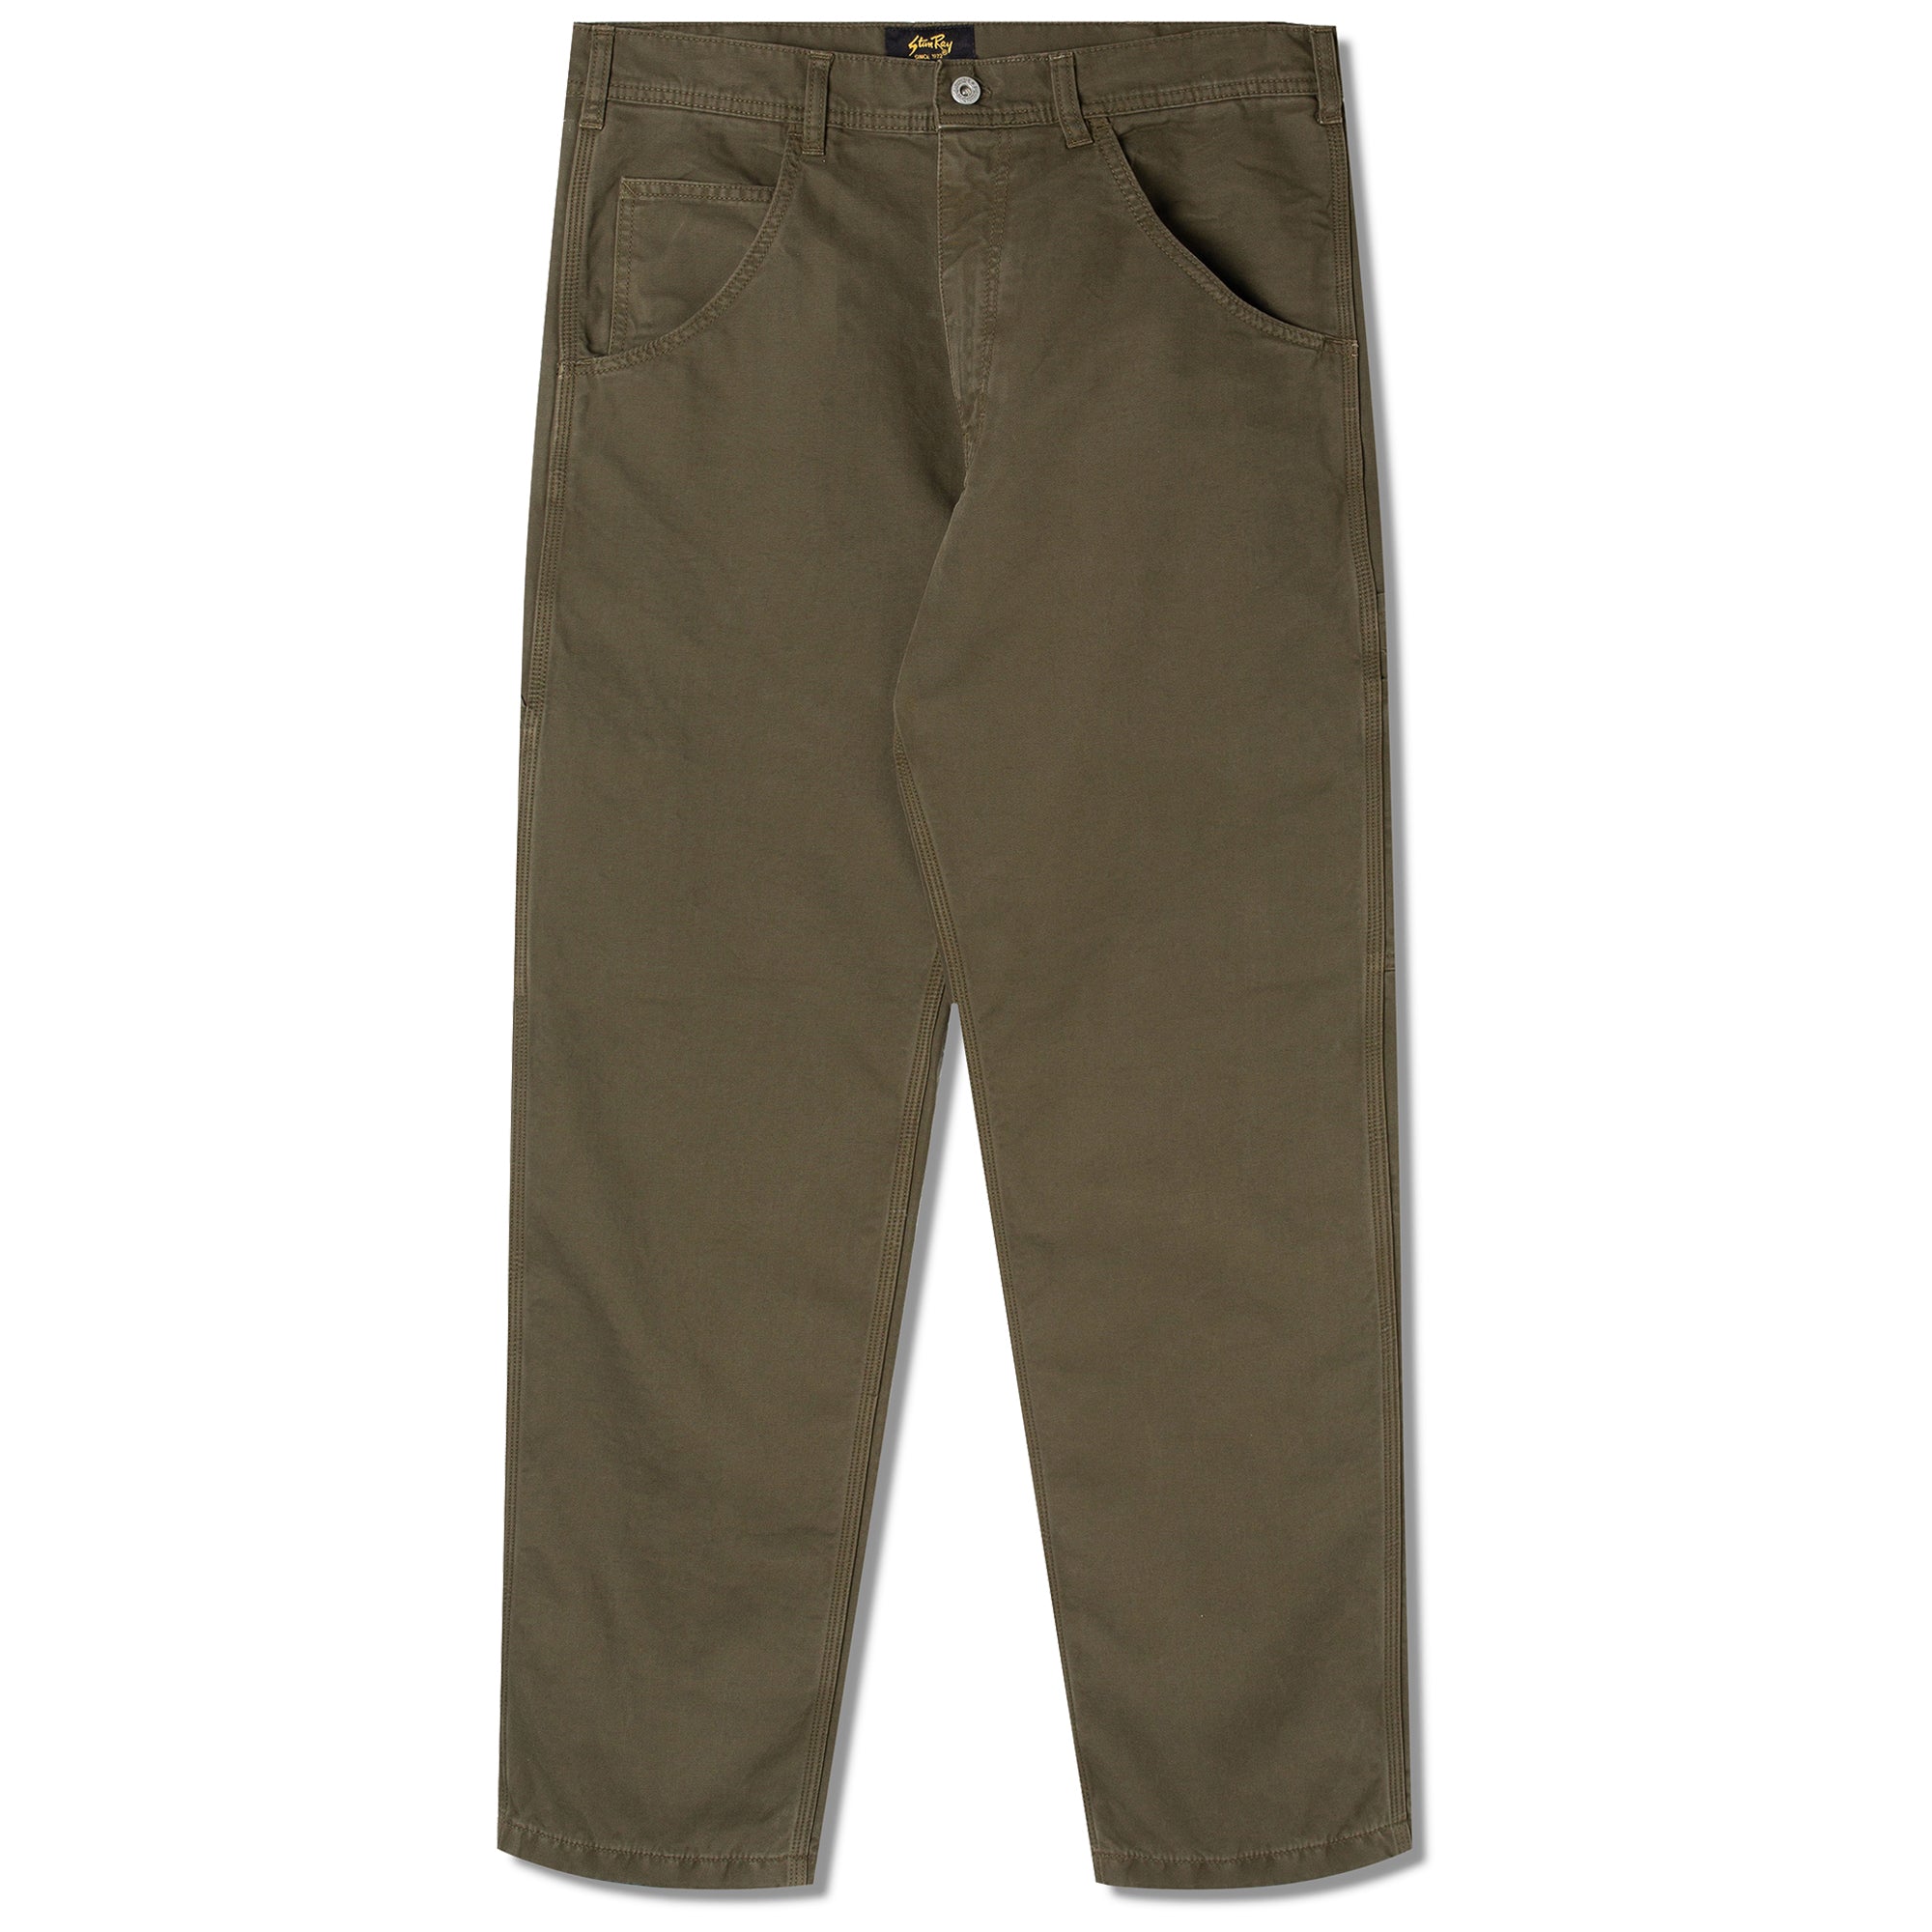 Stan Ray 80s Painter Pant - Olive Twill